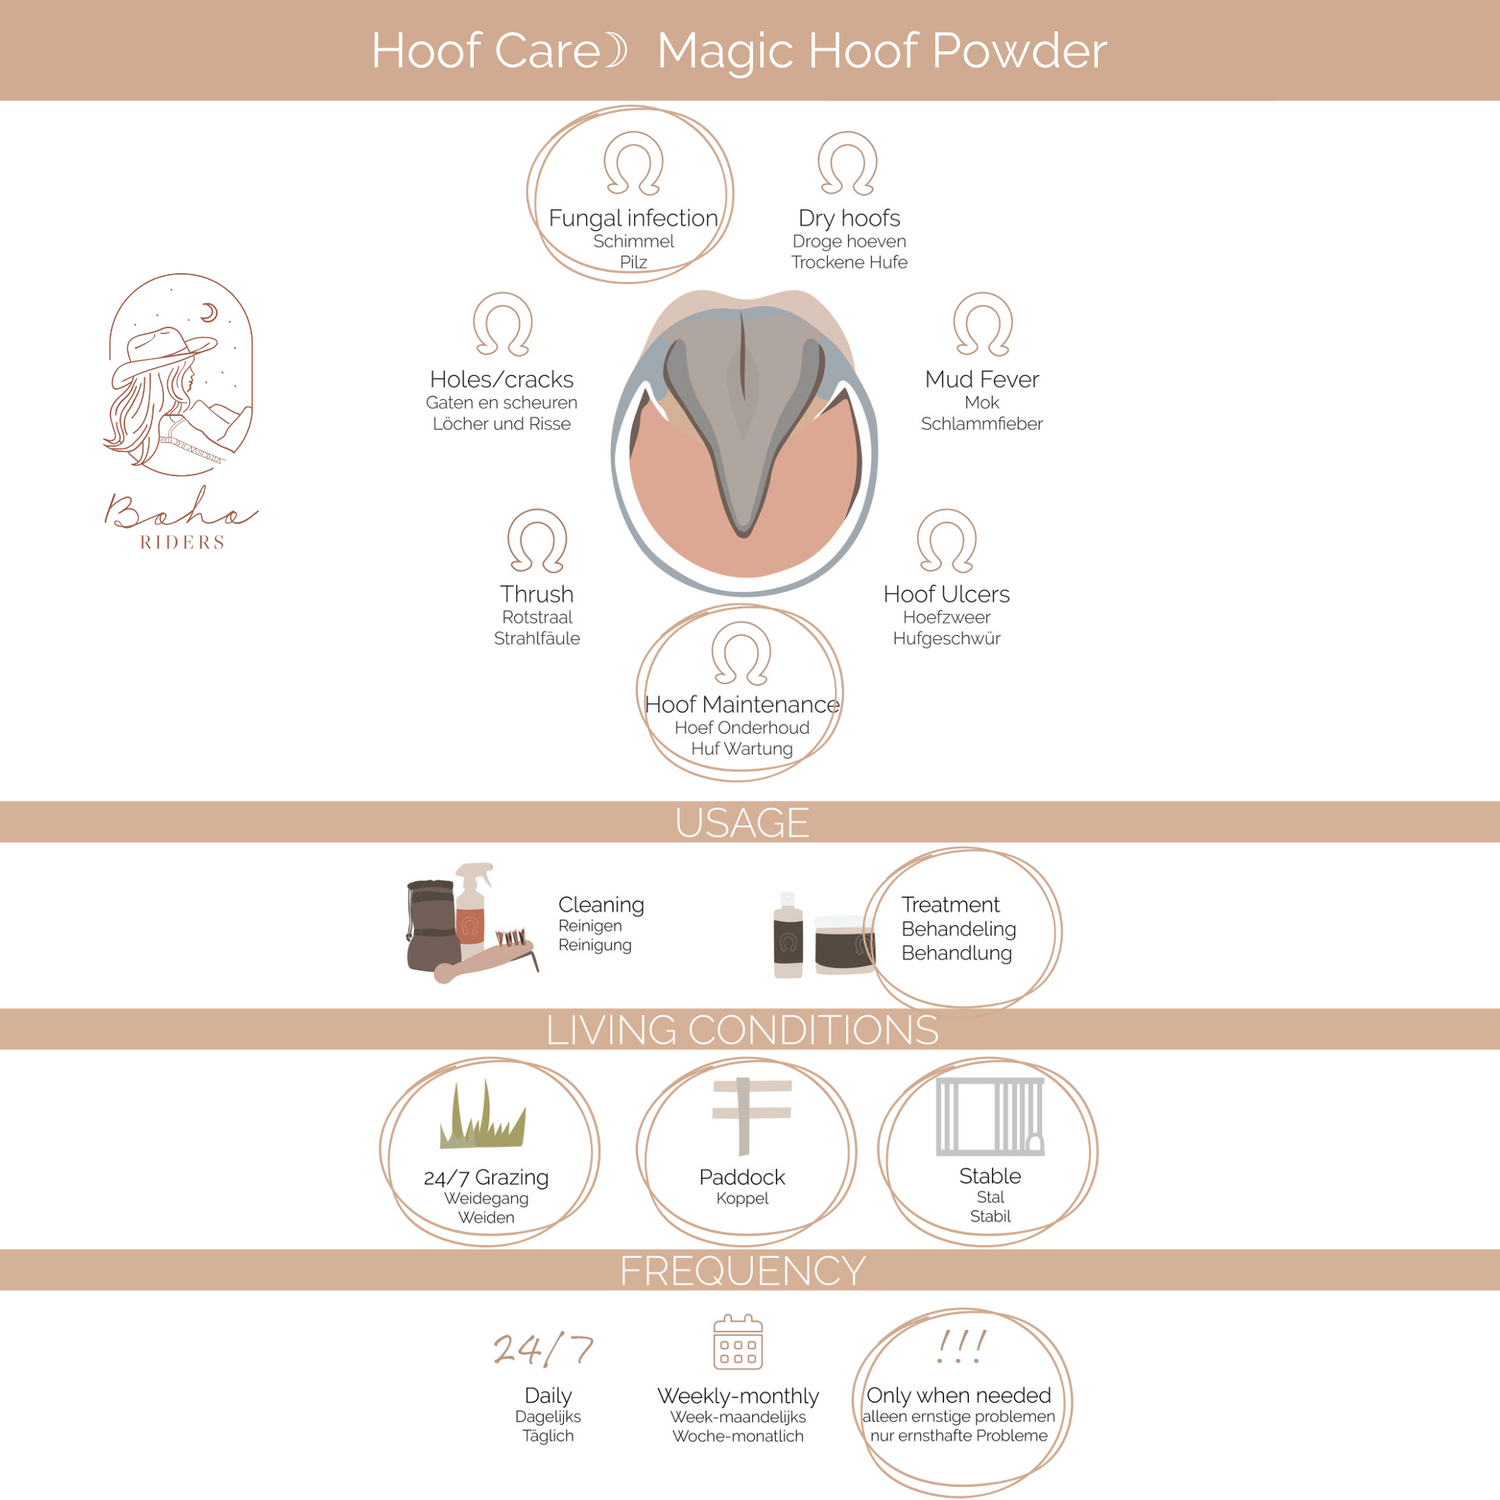 Unique-horn Magic Hoof Powder - Hoof Care - 120GR - Powder - Suitable for moisture-related hoof problems 